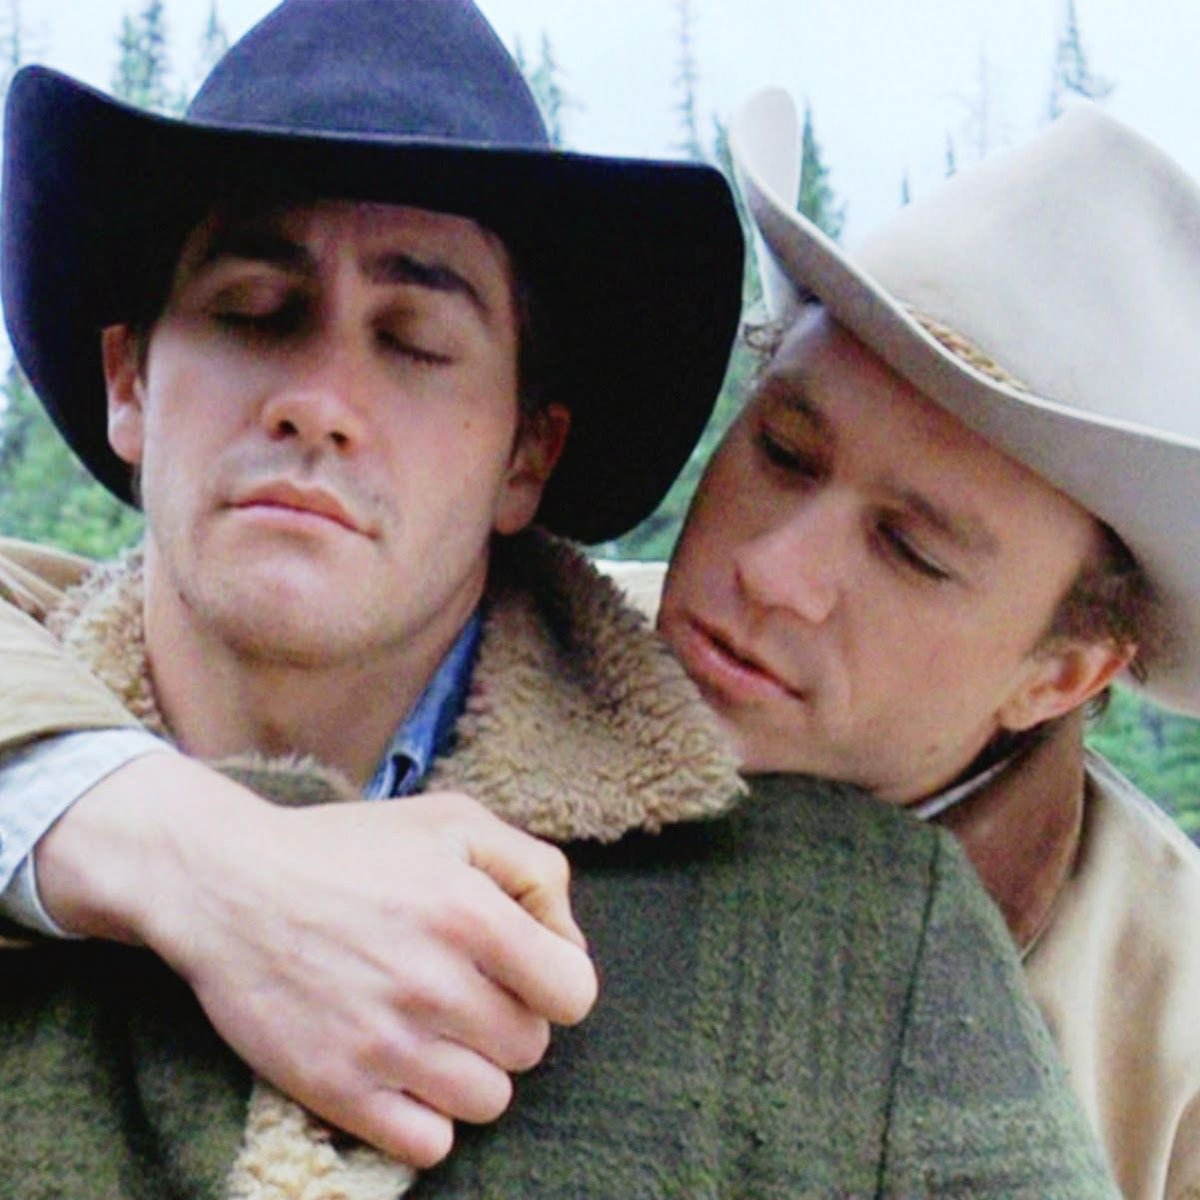 Matt Damon and Joaquin Phoenix were offered the roles of Ennis and Jack in Gus Van Sant’s planned adaptation of Brokeback Mountain before the project fell apart. Leonardo DiCaprio, Brad Pitt and Ryan Phillippe were also considered for the roles.